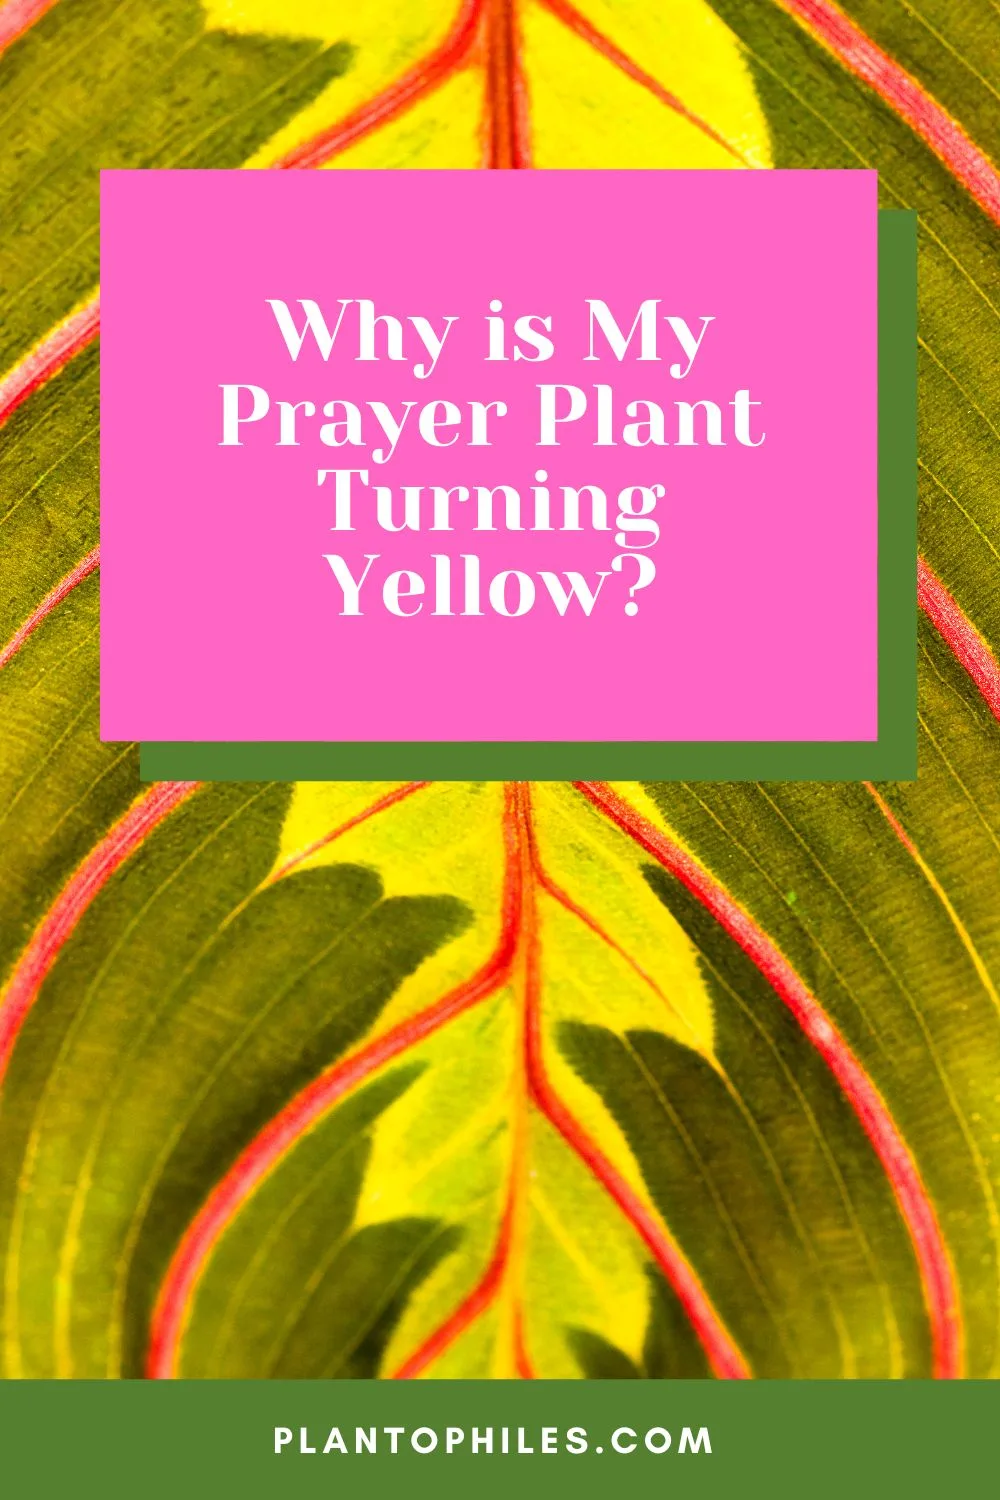 Why is My Prayer Plant Turning Yellow?